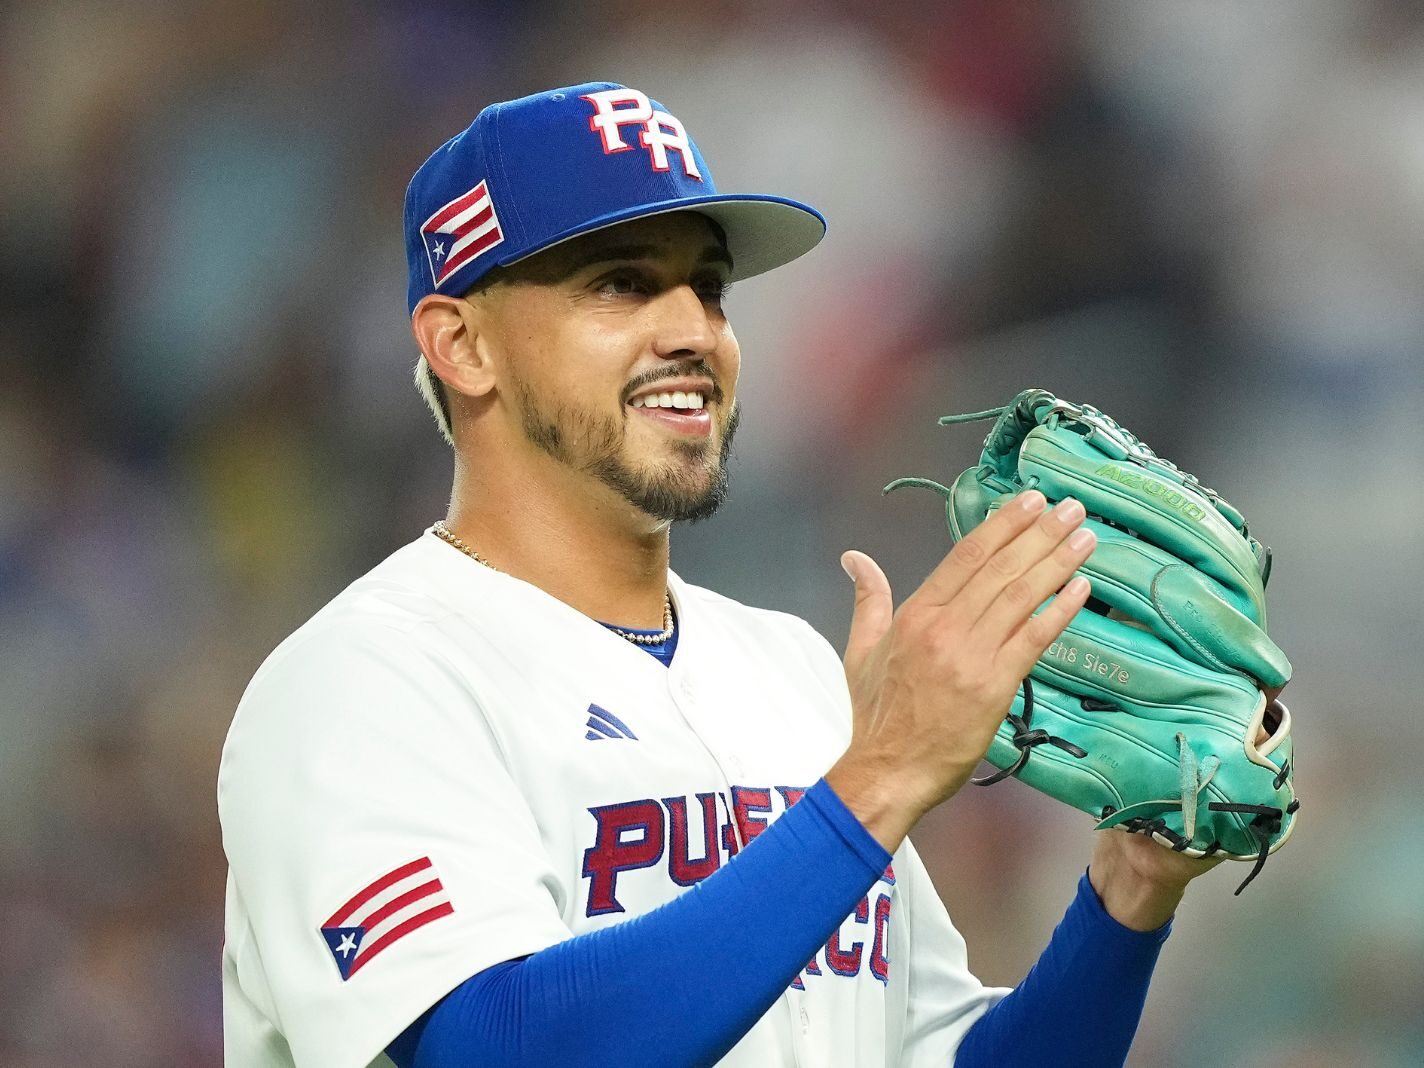 WATCH: Puerto Rico Makes World Baseball Classic History With Perfect Game